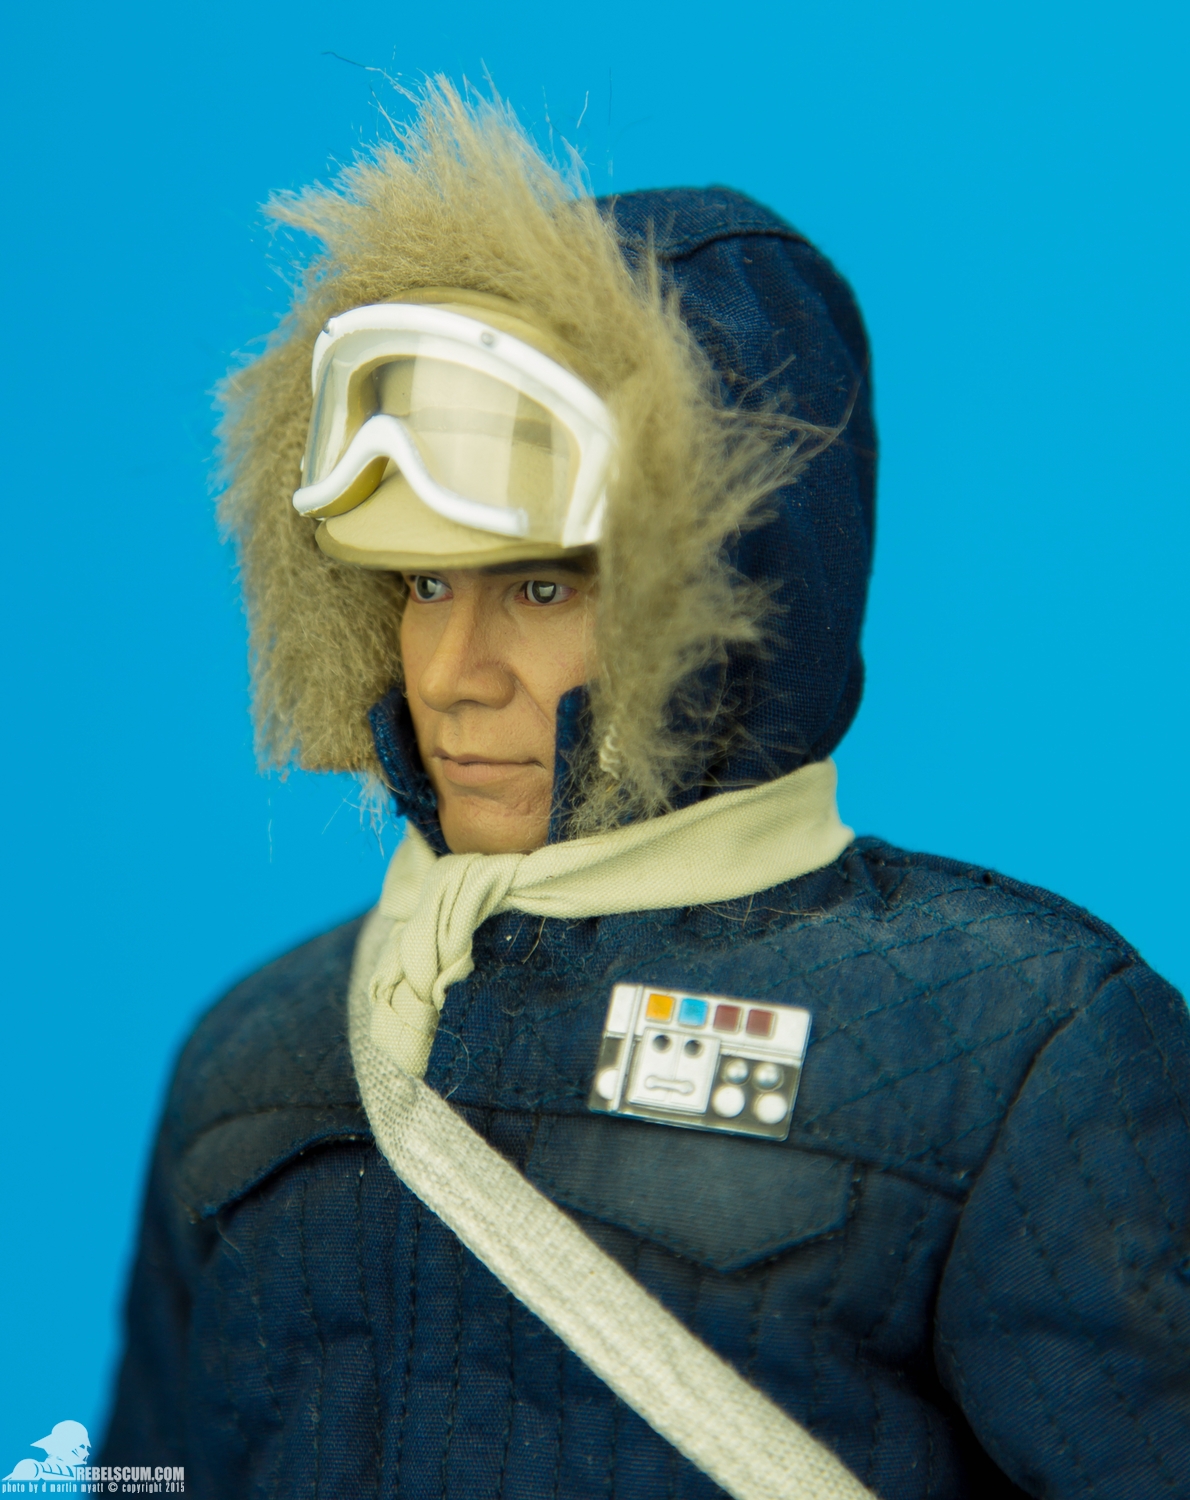 Han-Solo-Hoth-Blue-Sixth-Scale-Sideshow-Collectibles-Star-Wars-007.jpg